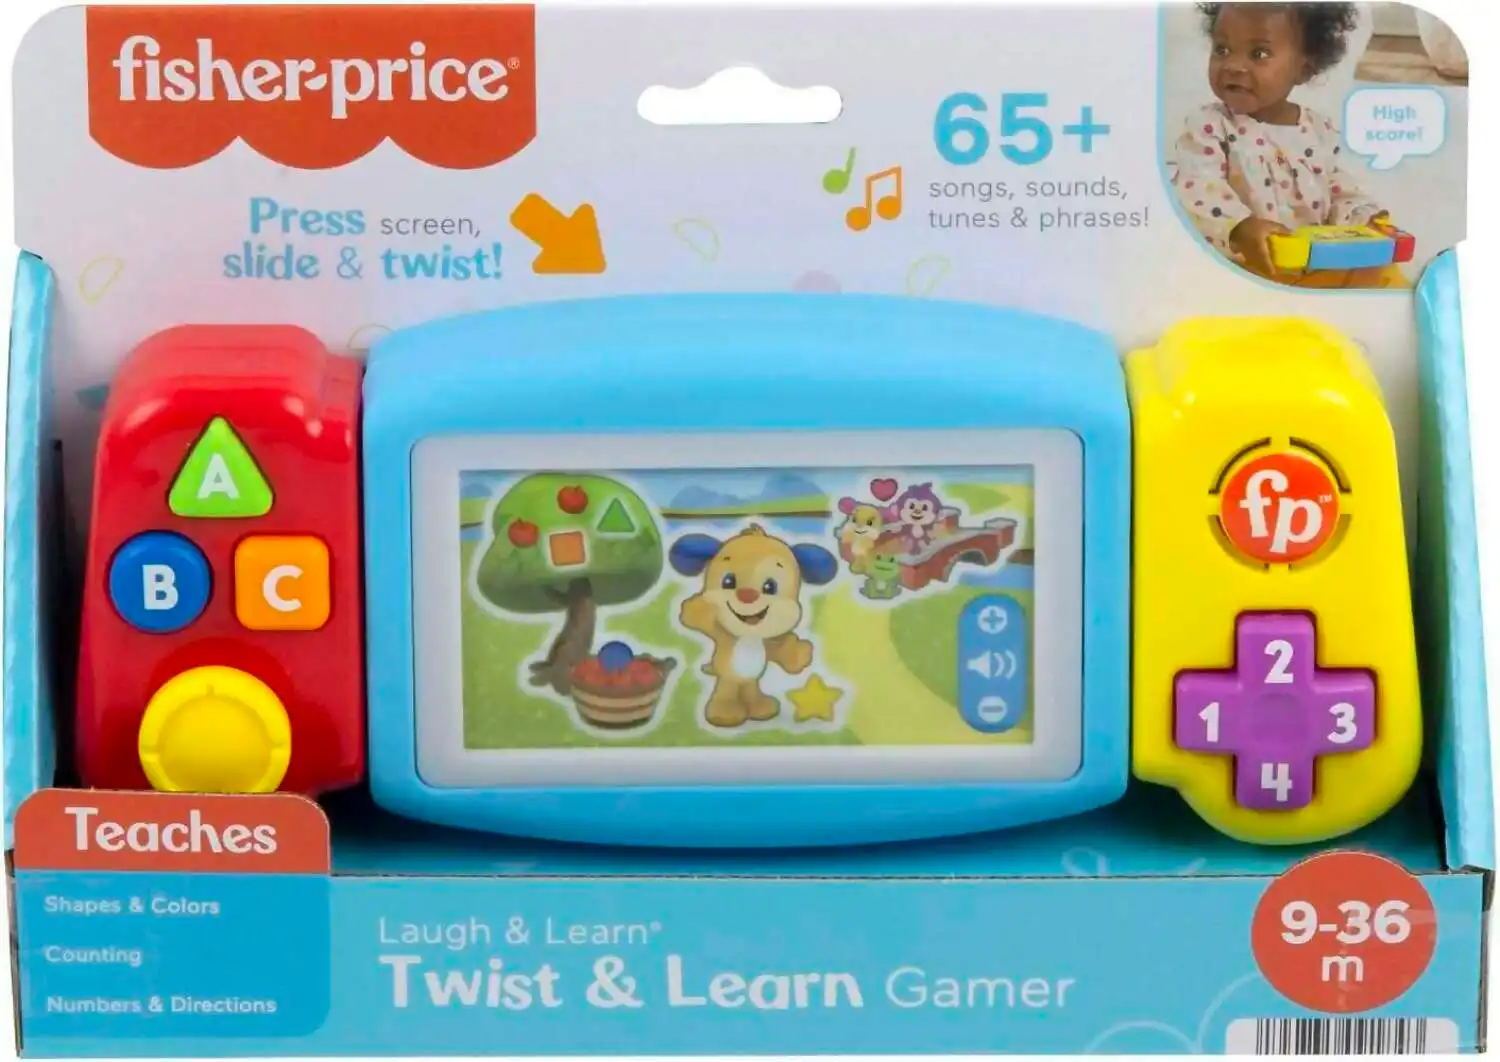 Fisher-price - Laugh & Learn Twist & Learn Gamer Pretend Video Game Learning Toy For Infant & Toddler